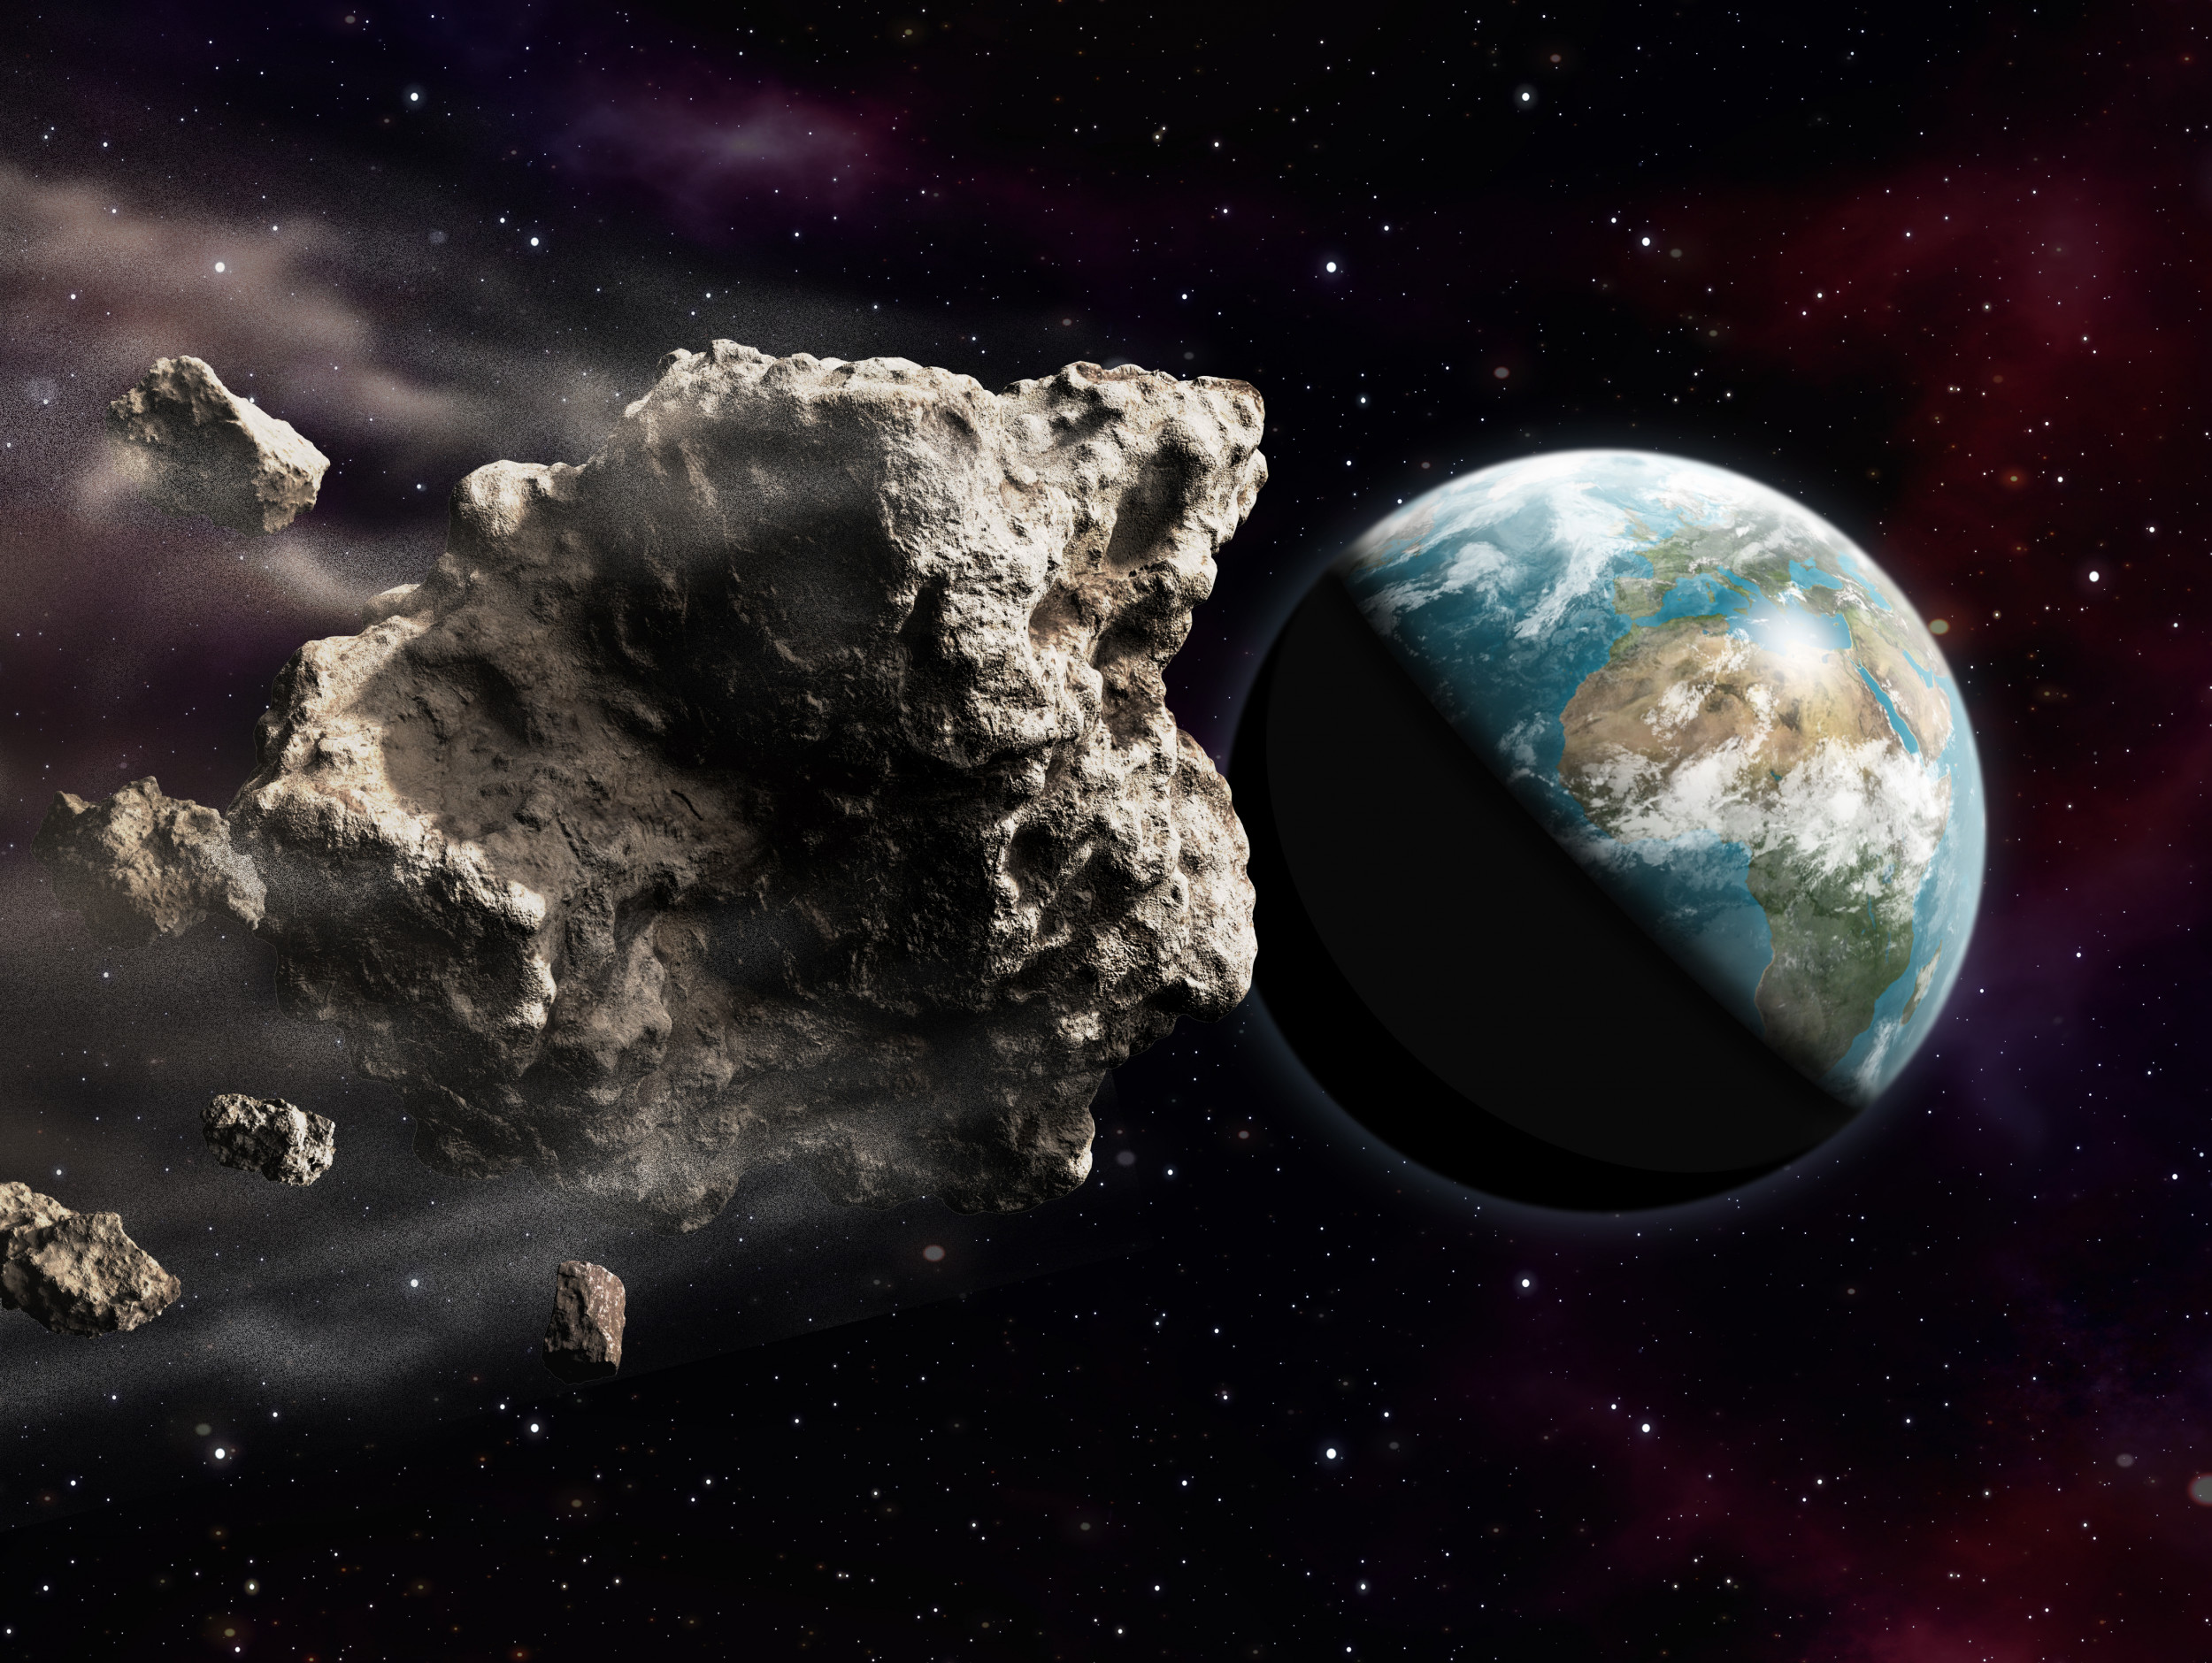 Image shows asteroid that just came ‘extremely close’ to Earth